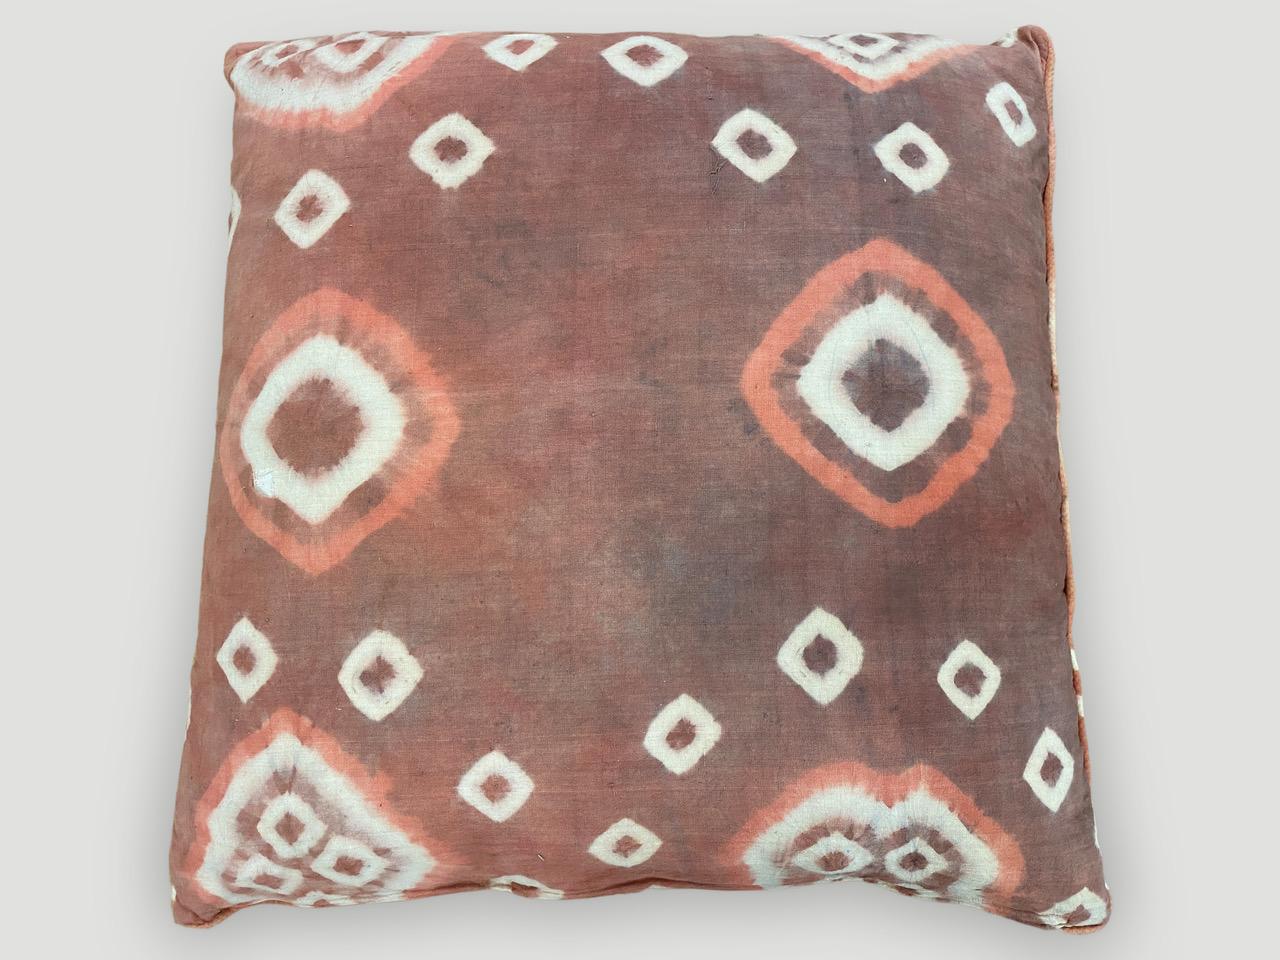 Beautiful antique textiles found in Toraja Land, South Sulawesi, are made into pillows with piping and concealed zippers. Double backed with stunning contrasting colors. Inserts included. We have a collection. The size and price reflect the one